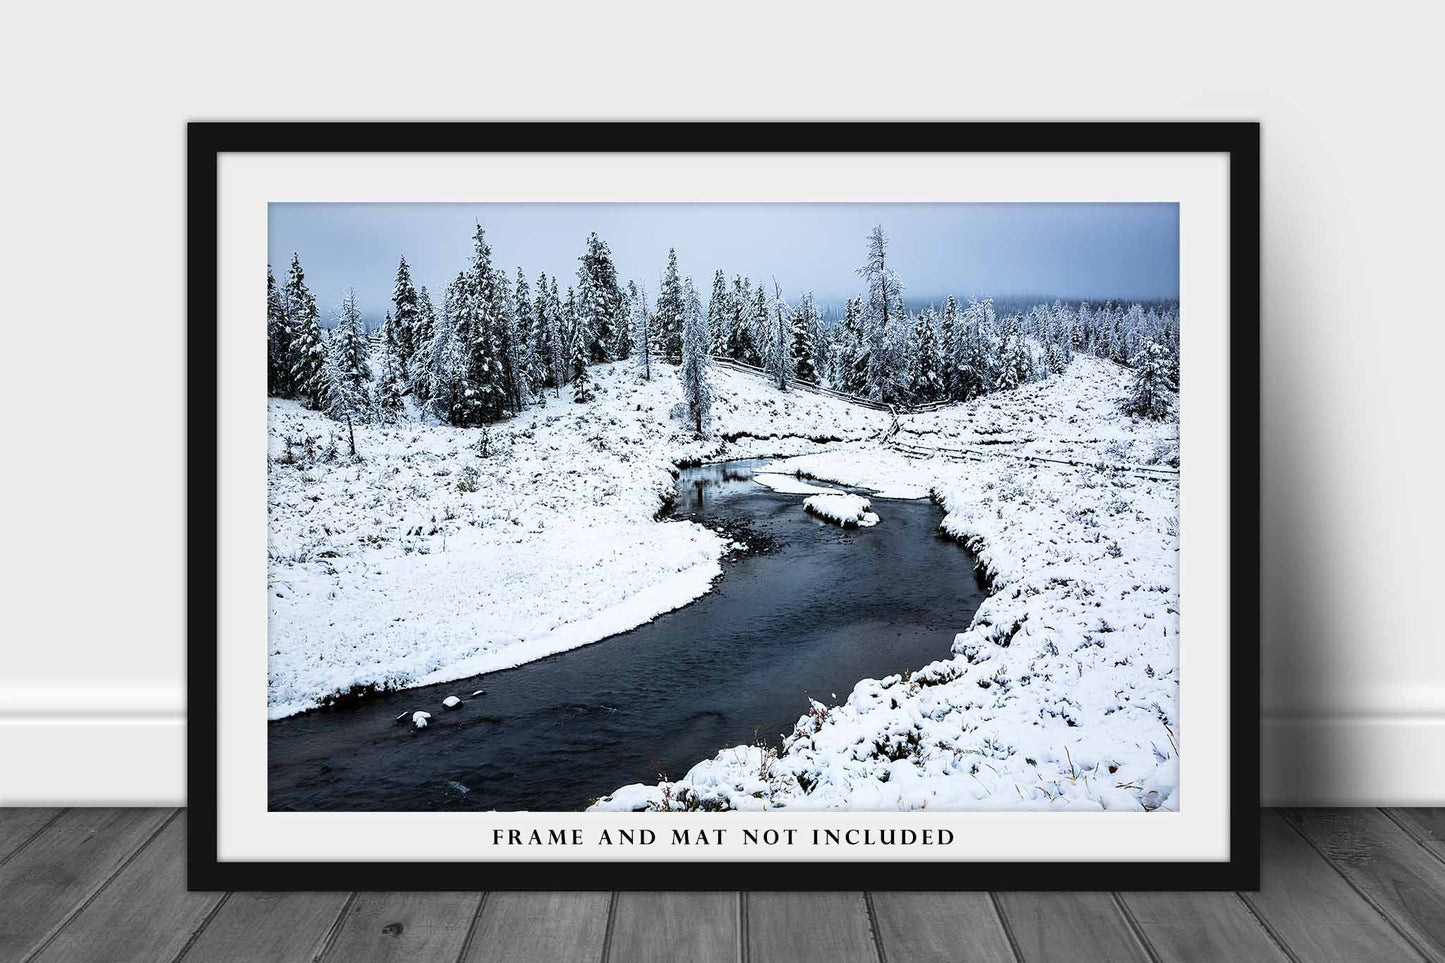 Rocky Mountain Photography Print (Not Framed) Picture of Wind River and Forest Covered in Snow on Winter Day in Wyoming Western Wall Art Nature Decor